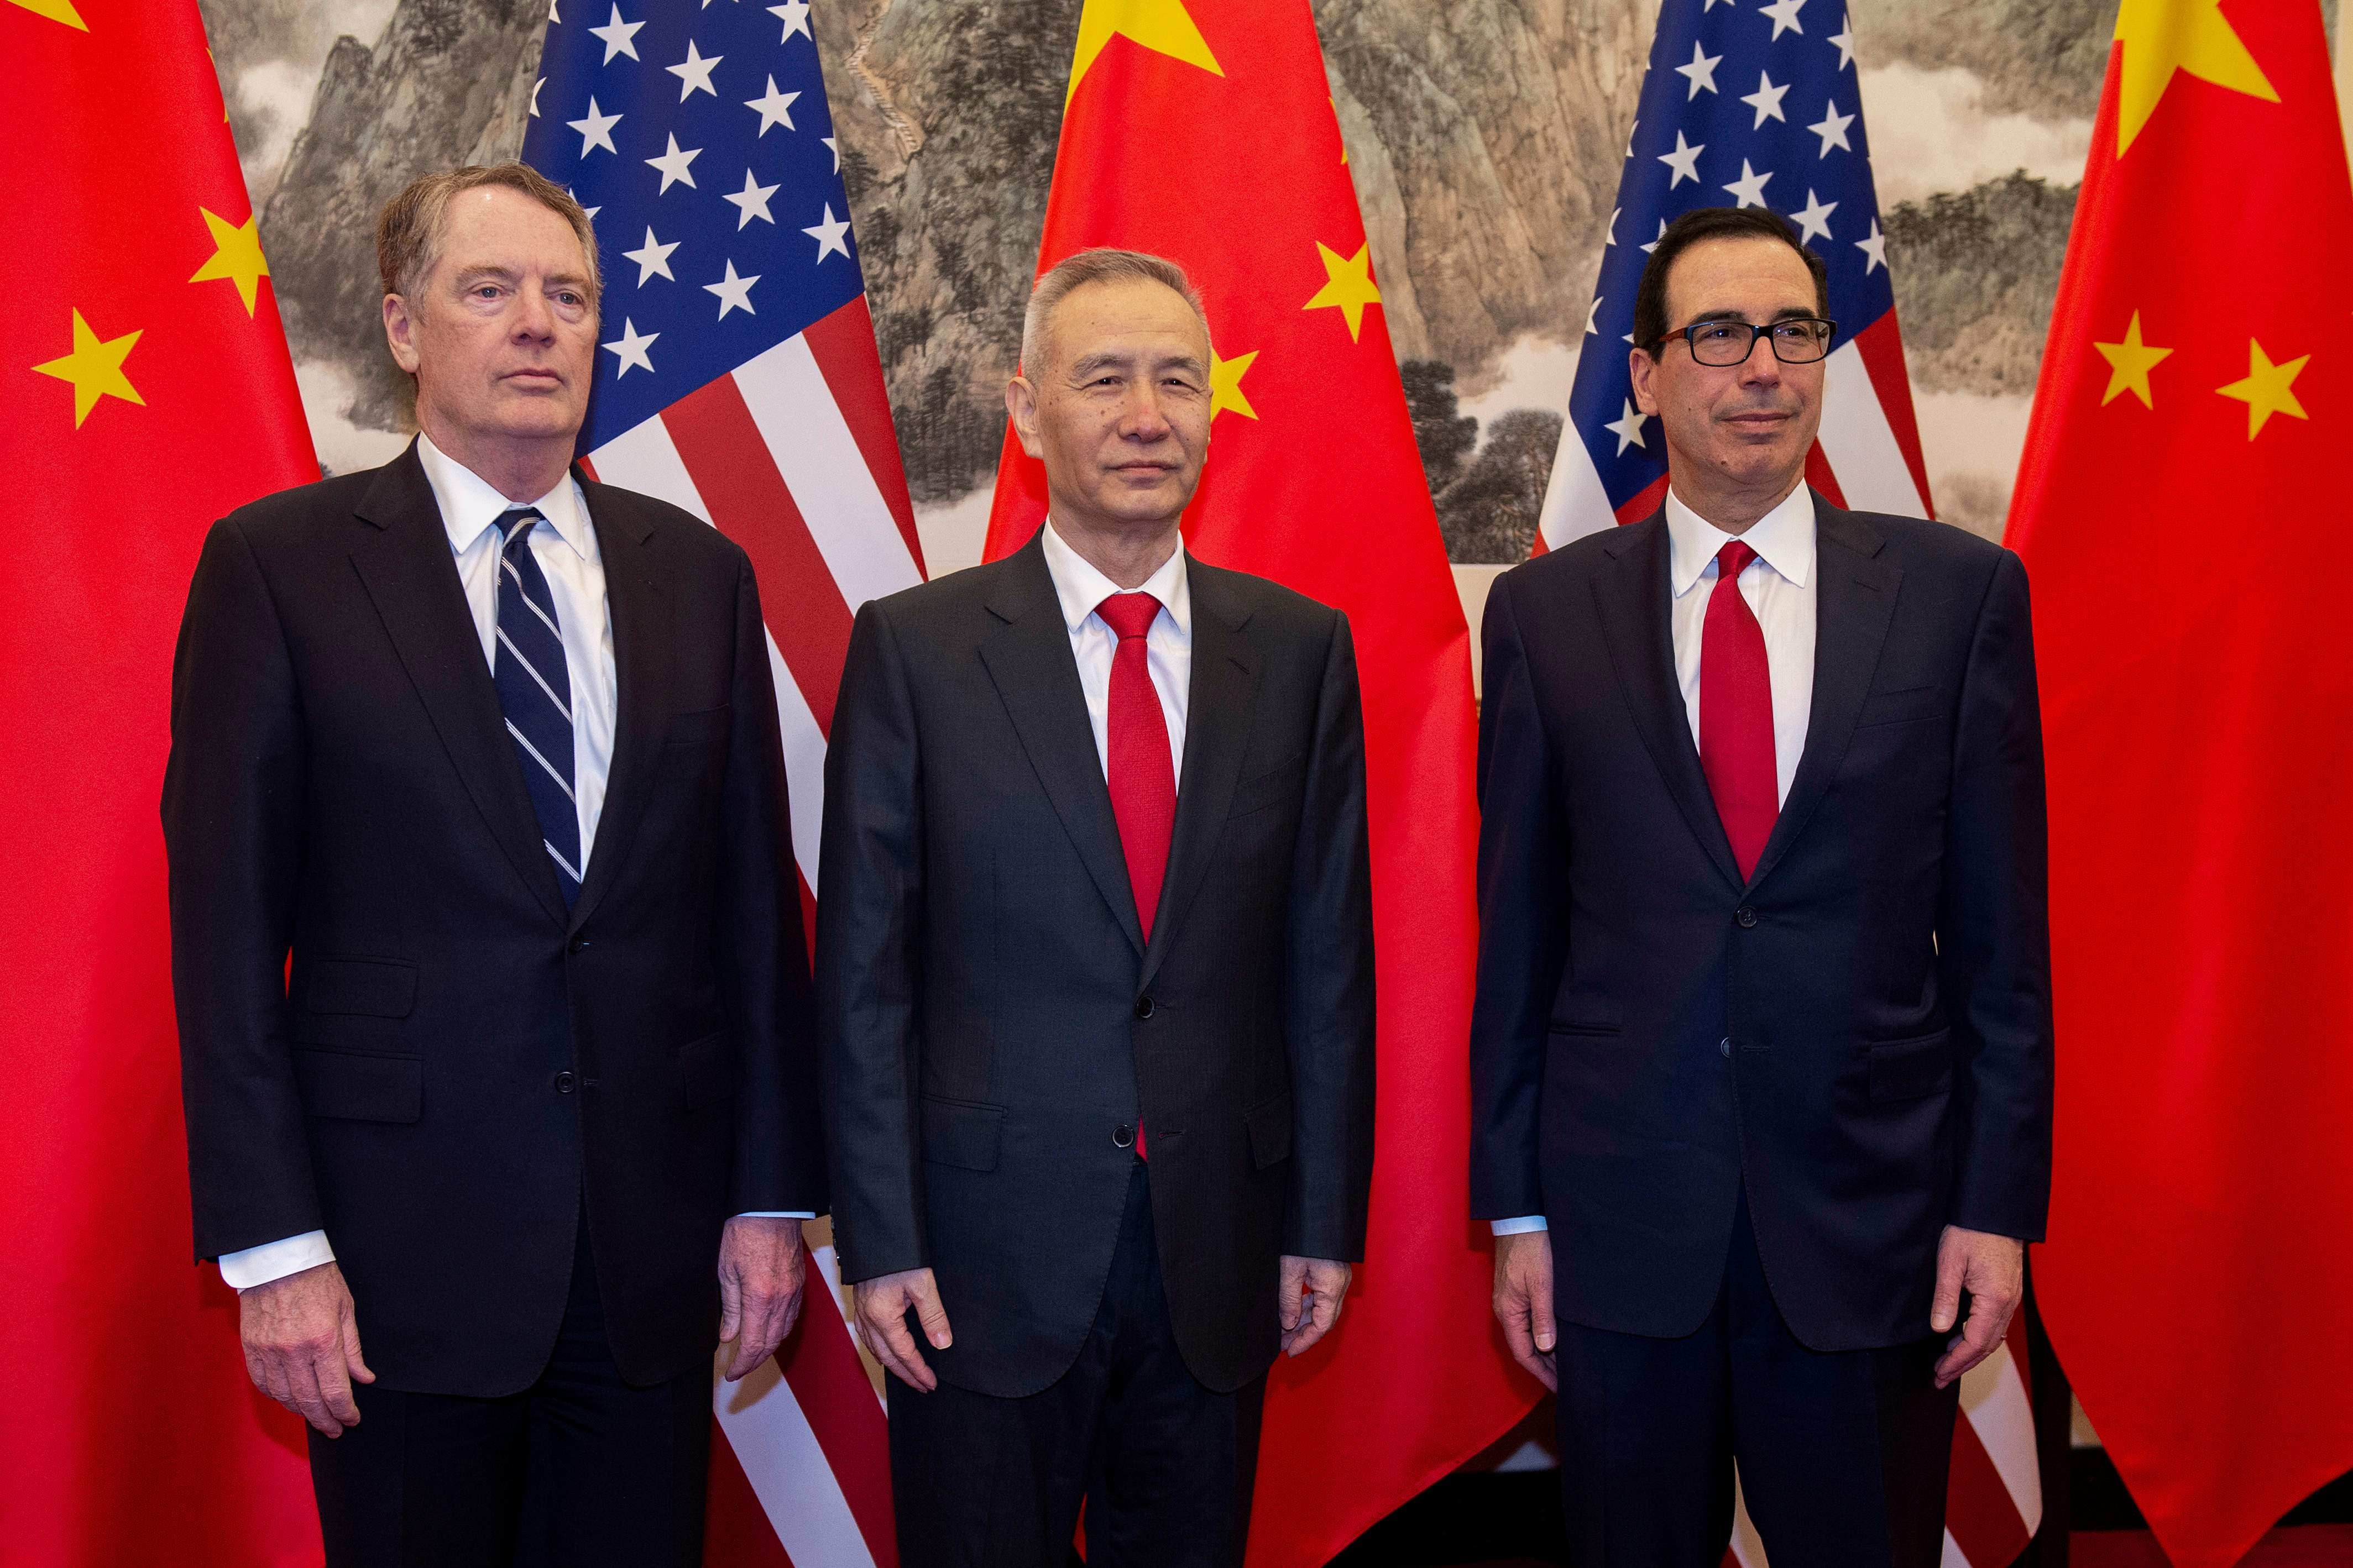 China's Vice-Premier Liu He poses for a photo with US Treasury Secretary Steven Mnuchin (right) and US Trade Representative Robert Lighthizer in Beijing on March 28. Ongoing negotiations between the US and China are reportedly nearing their end, with the possibility of Chinese President Xi Jinping signing a trade deal with US President Donald Trump floated for June. Photo: AFP